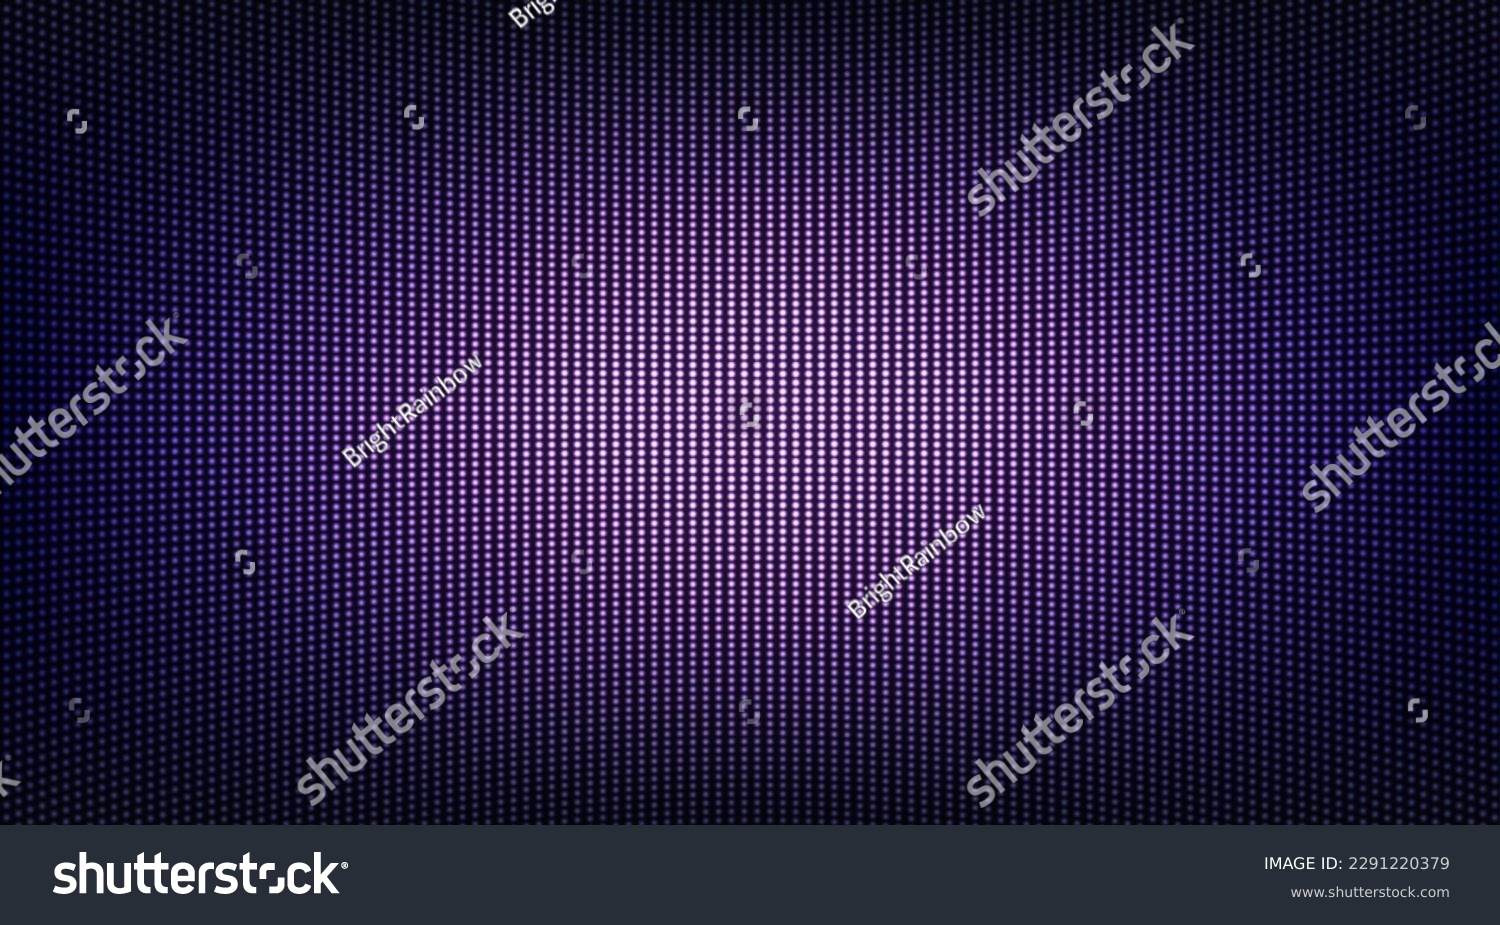 Led digital display. Lcd screen texture. TV pixel background. Violet television videowall. Monitor with dots. Electronic purple diode effect. Projector grid template. Vector illustration. #2291220379